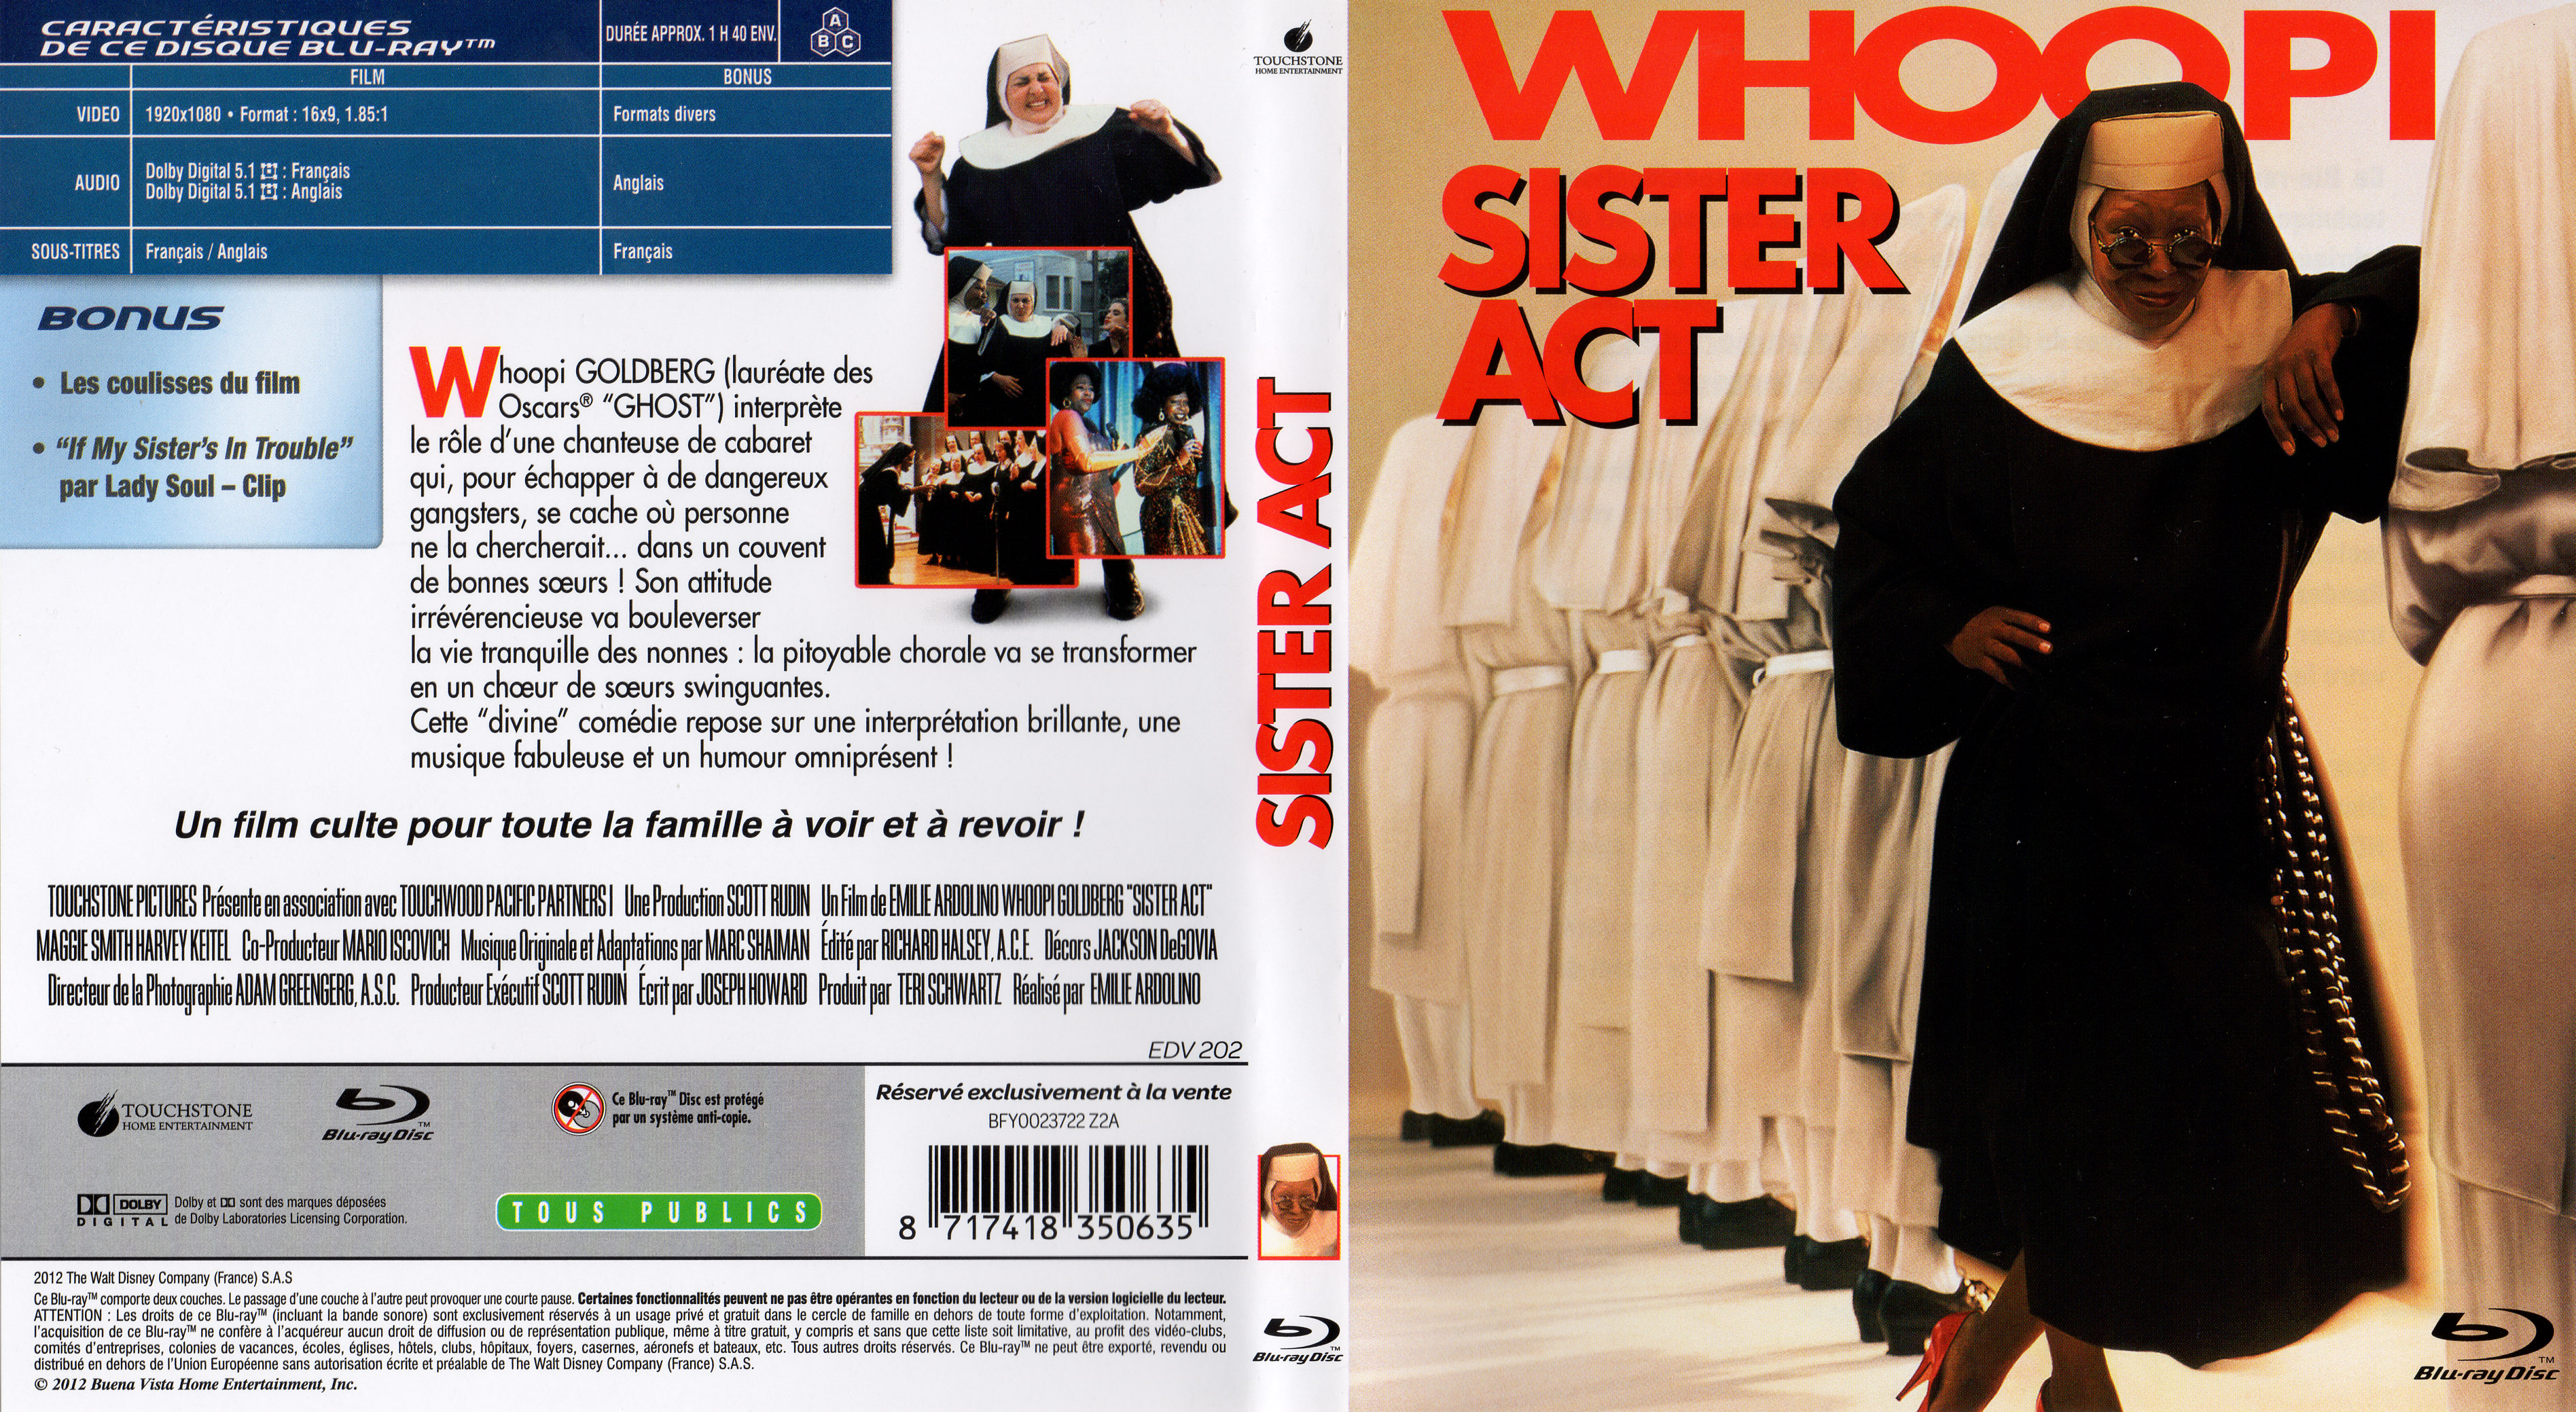 Jaquette DVD Sister act (BLU-RAY)